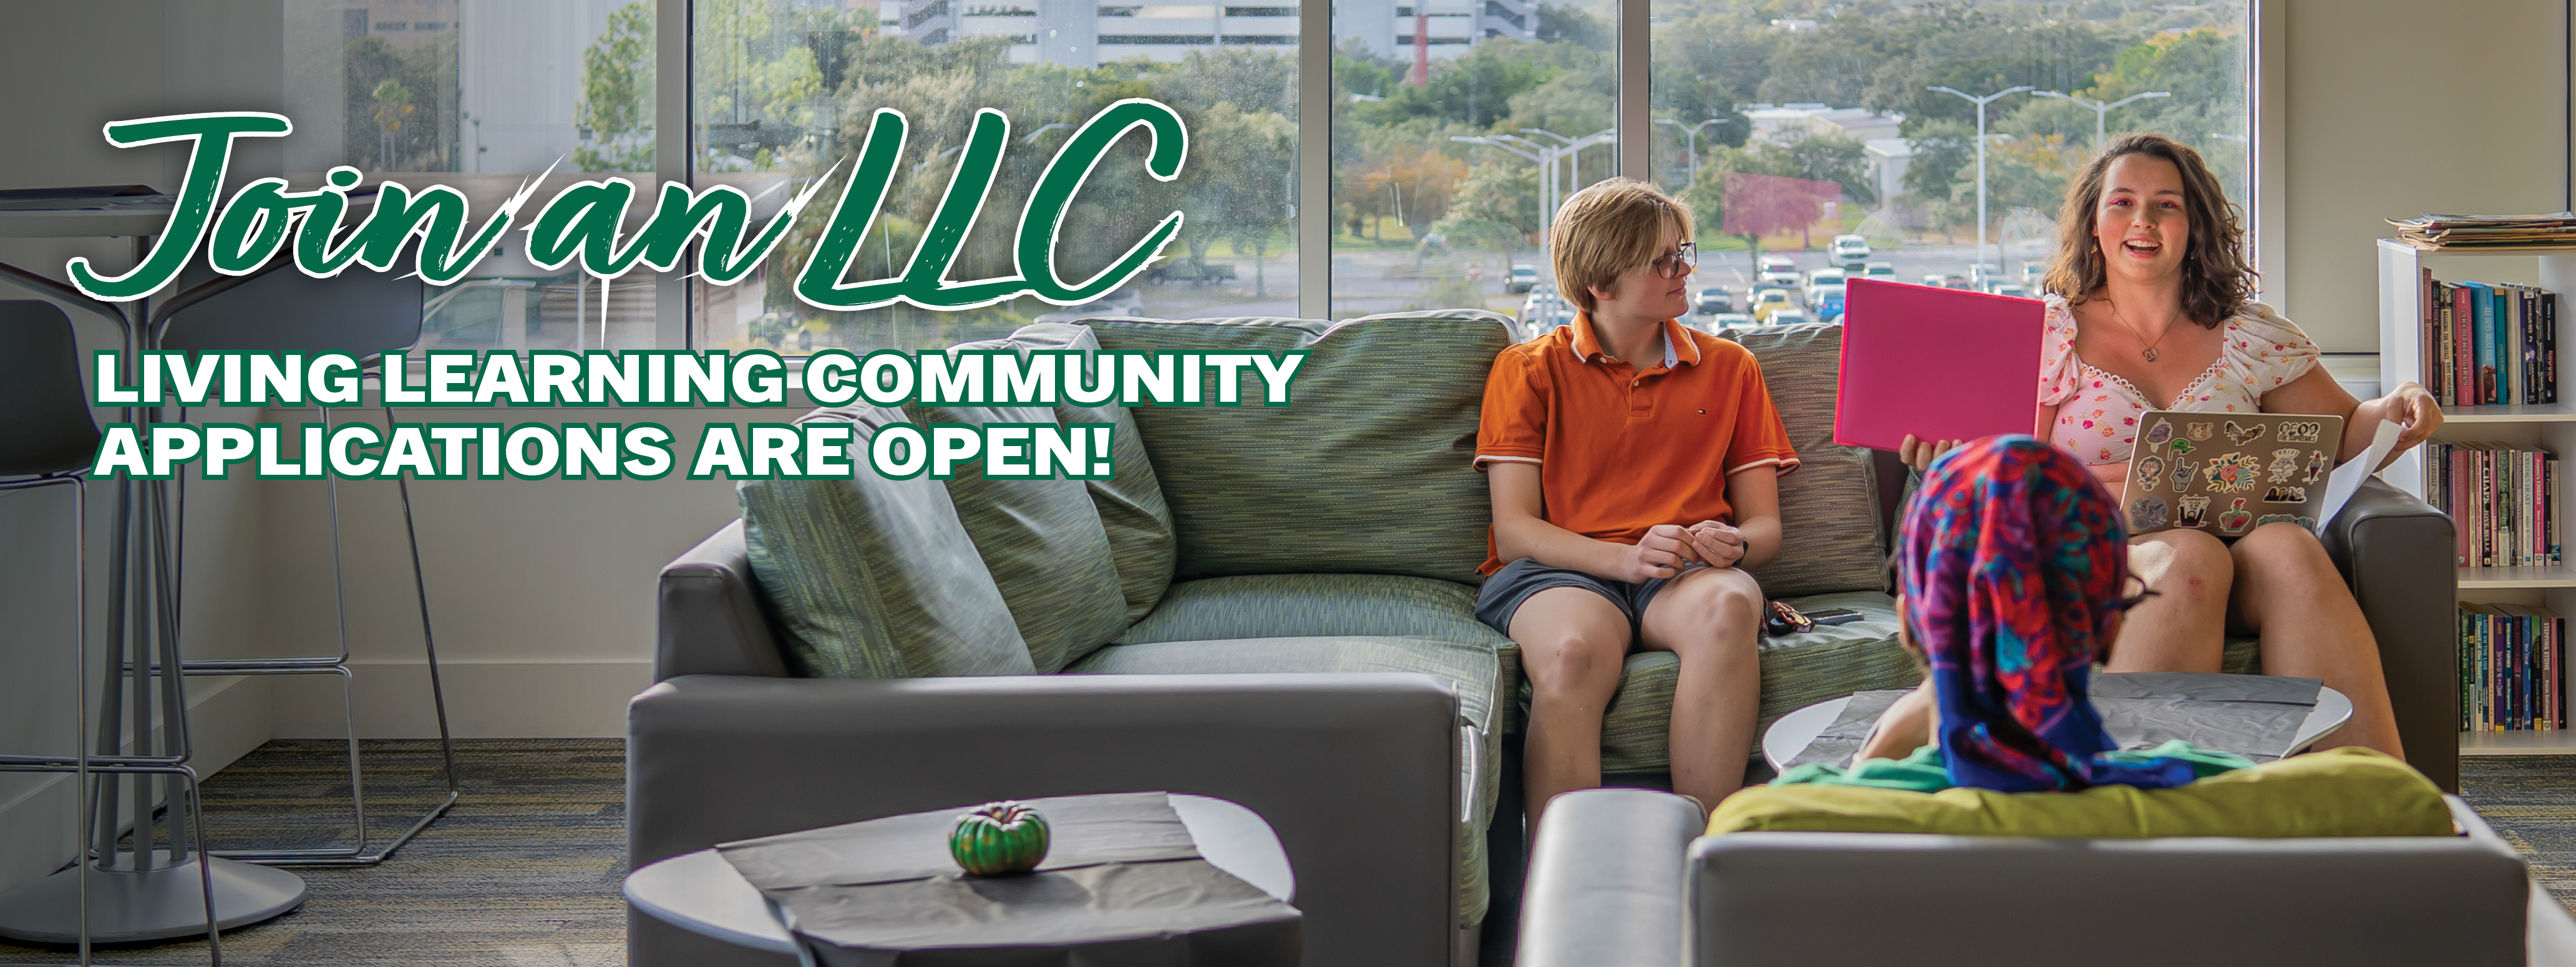 Join an LLC. Living Learning Community Applications Are Open! 